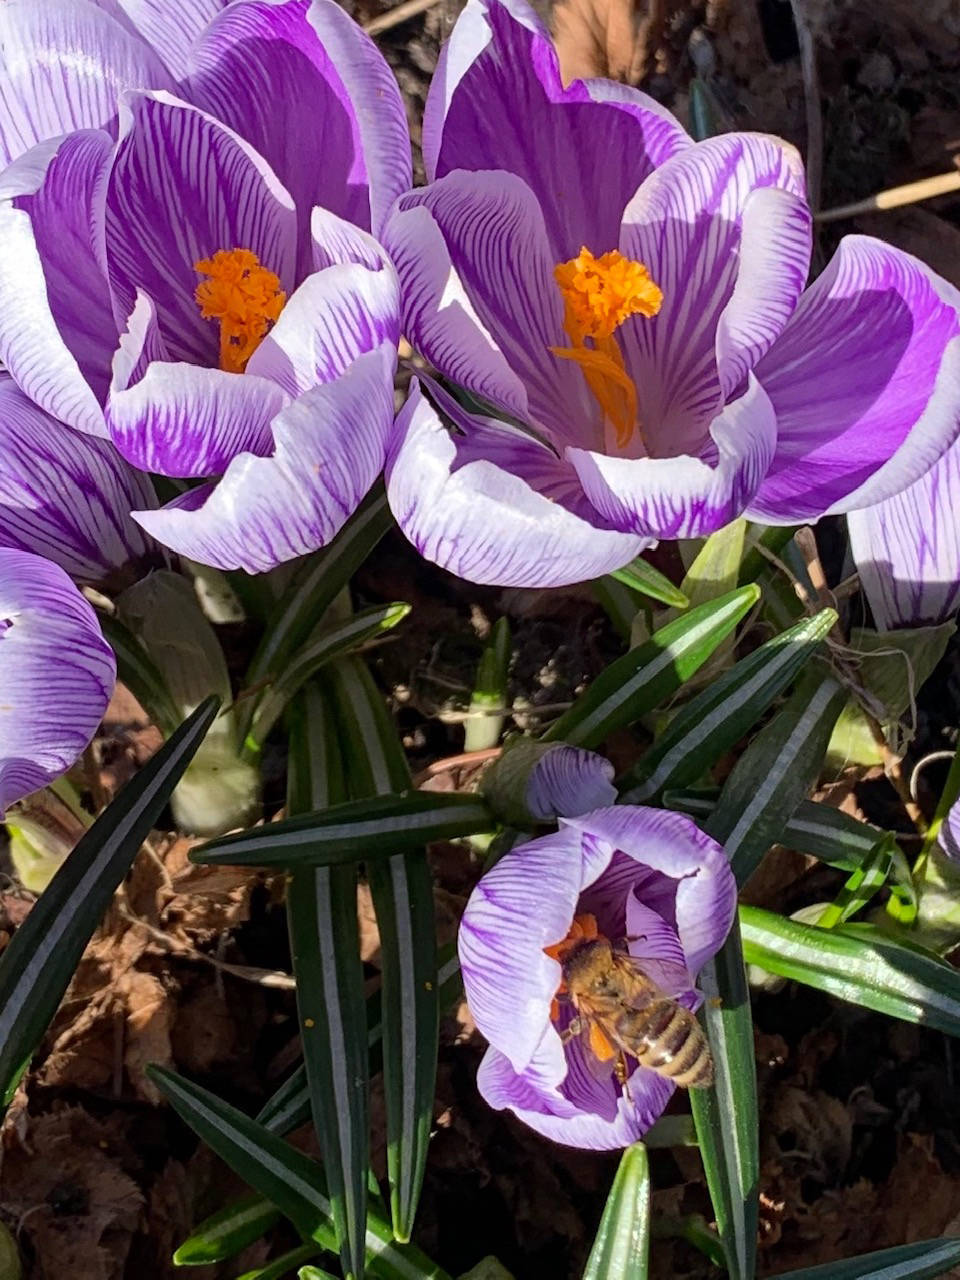 ”In addition to bringing early color and joy into our lives, the honeybees are equally entranced,” the Kachemak Gardener writes of crocuses blooming in her garden on March 31, 2019, in Homer, Alaska. (Photo by Rosemary Fitzpatrick)